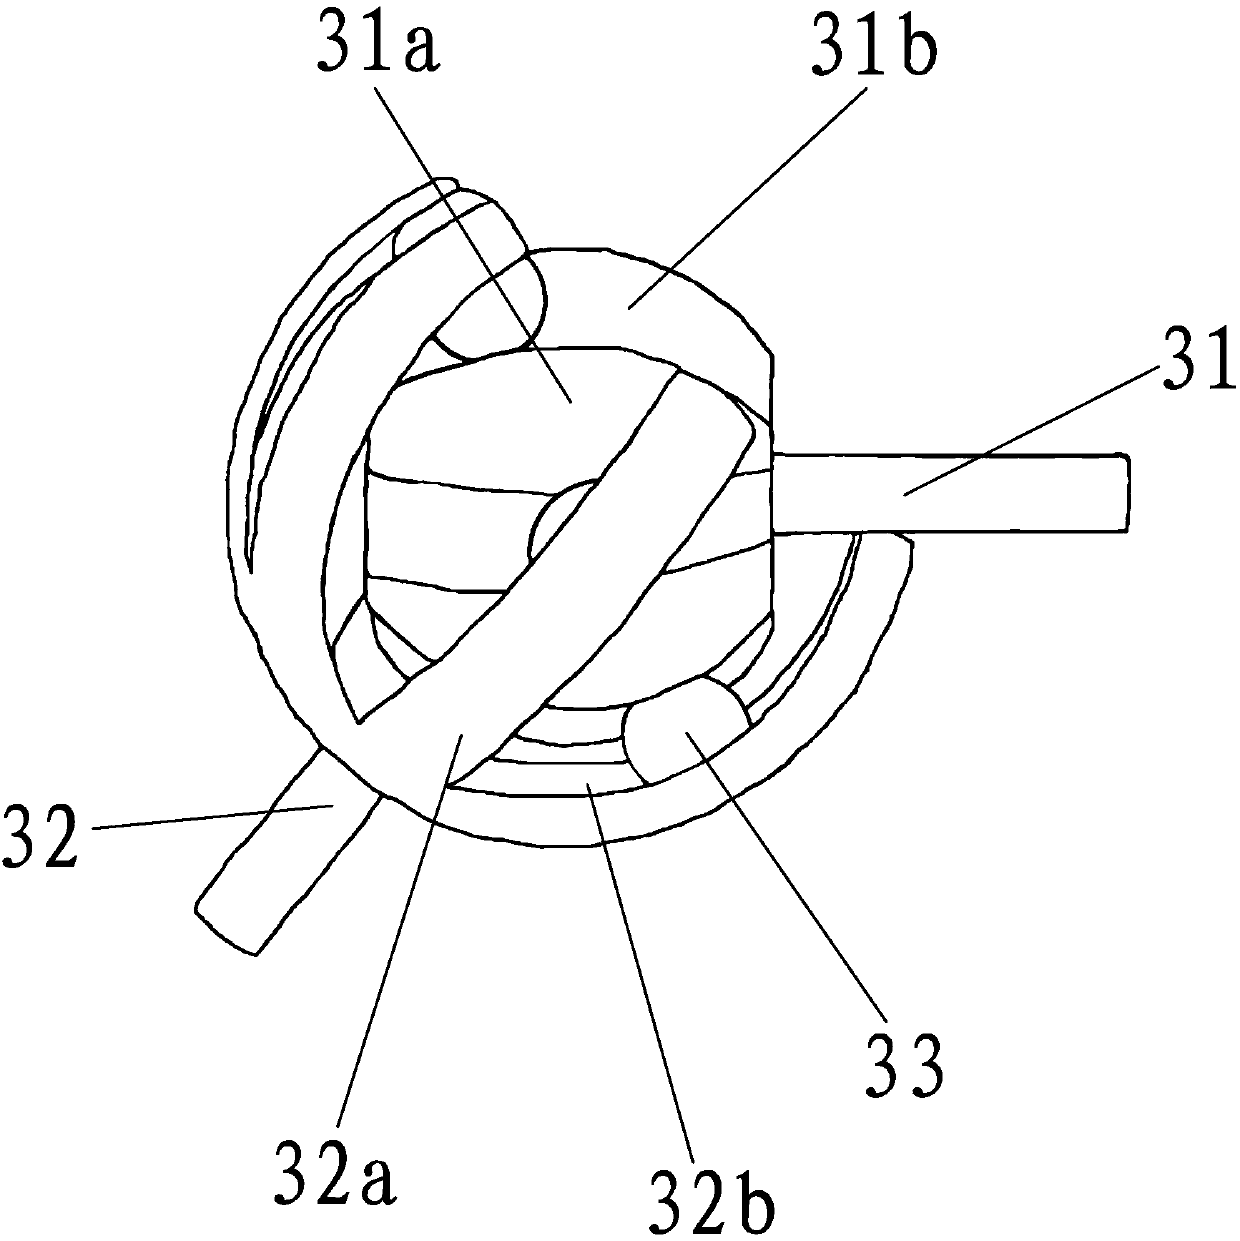 Coaxial linkage type flexible mechanical arm based on universal structures